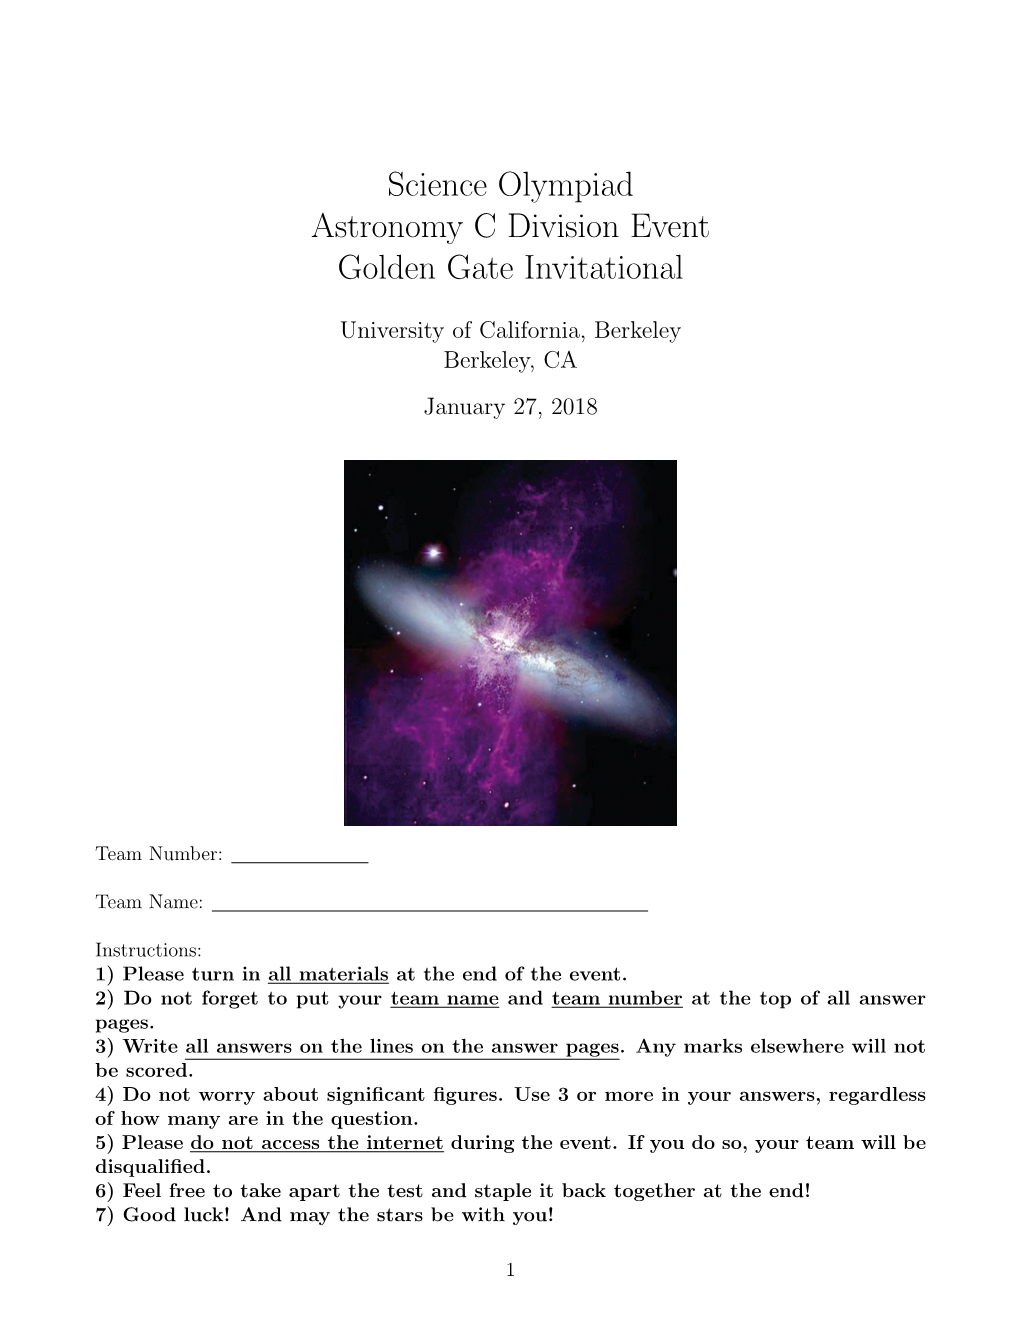 Science Olympiad Astronomy C Division Event Golden Gate Invitational